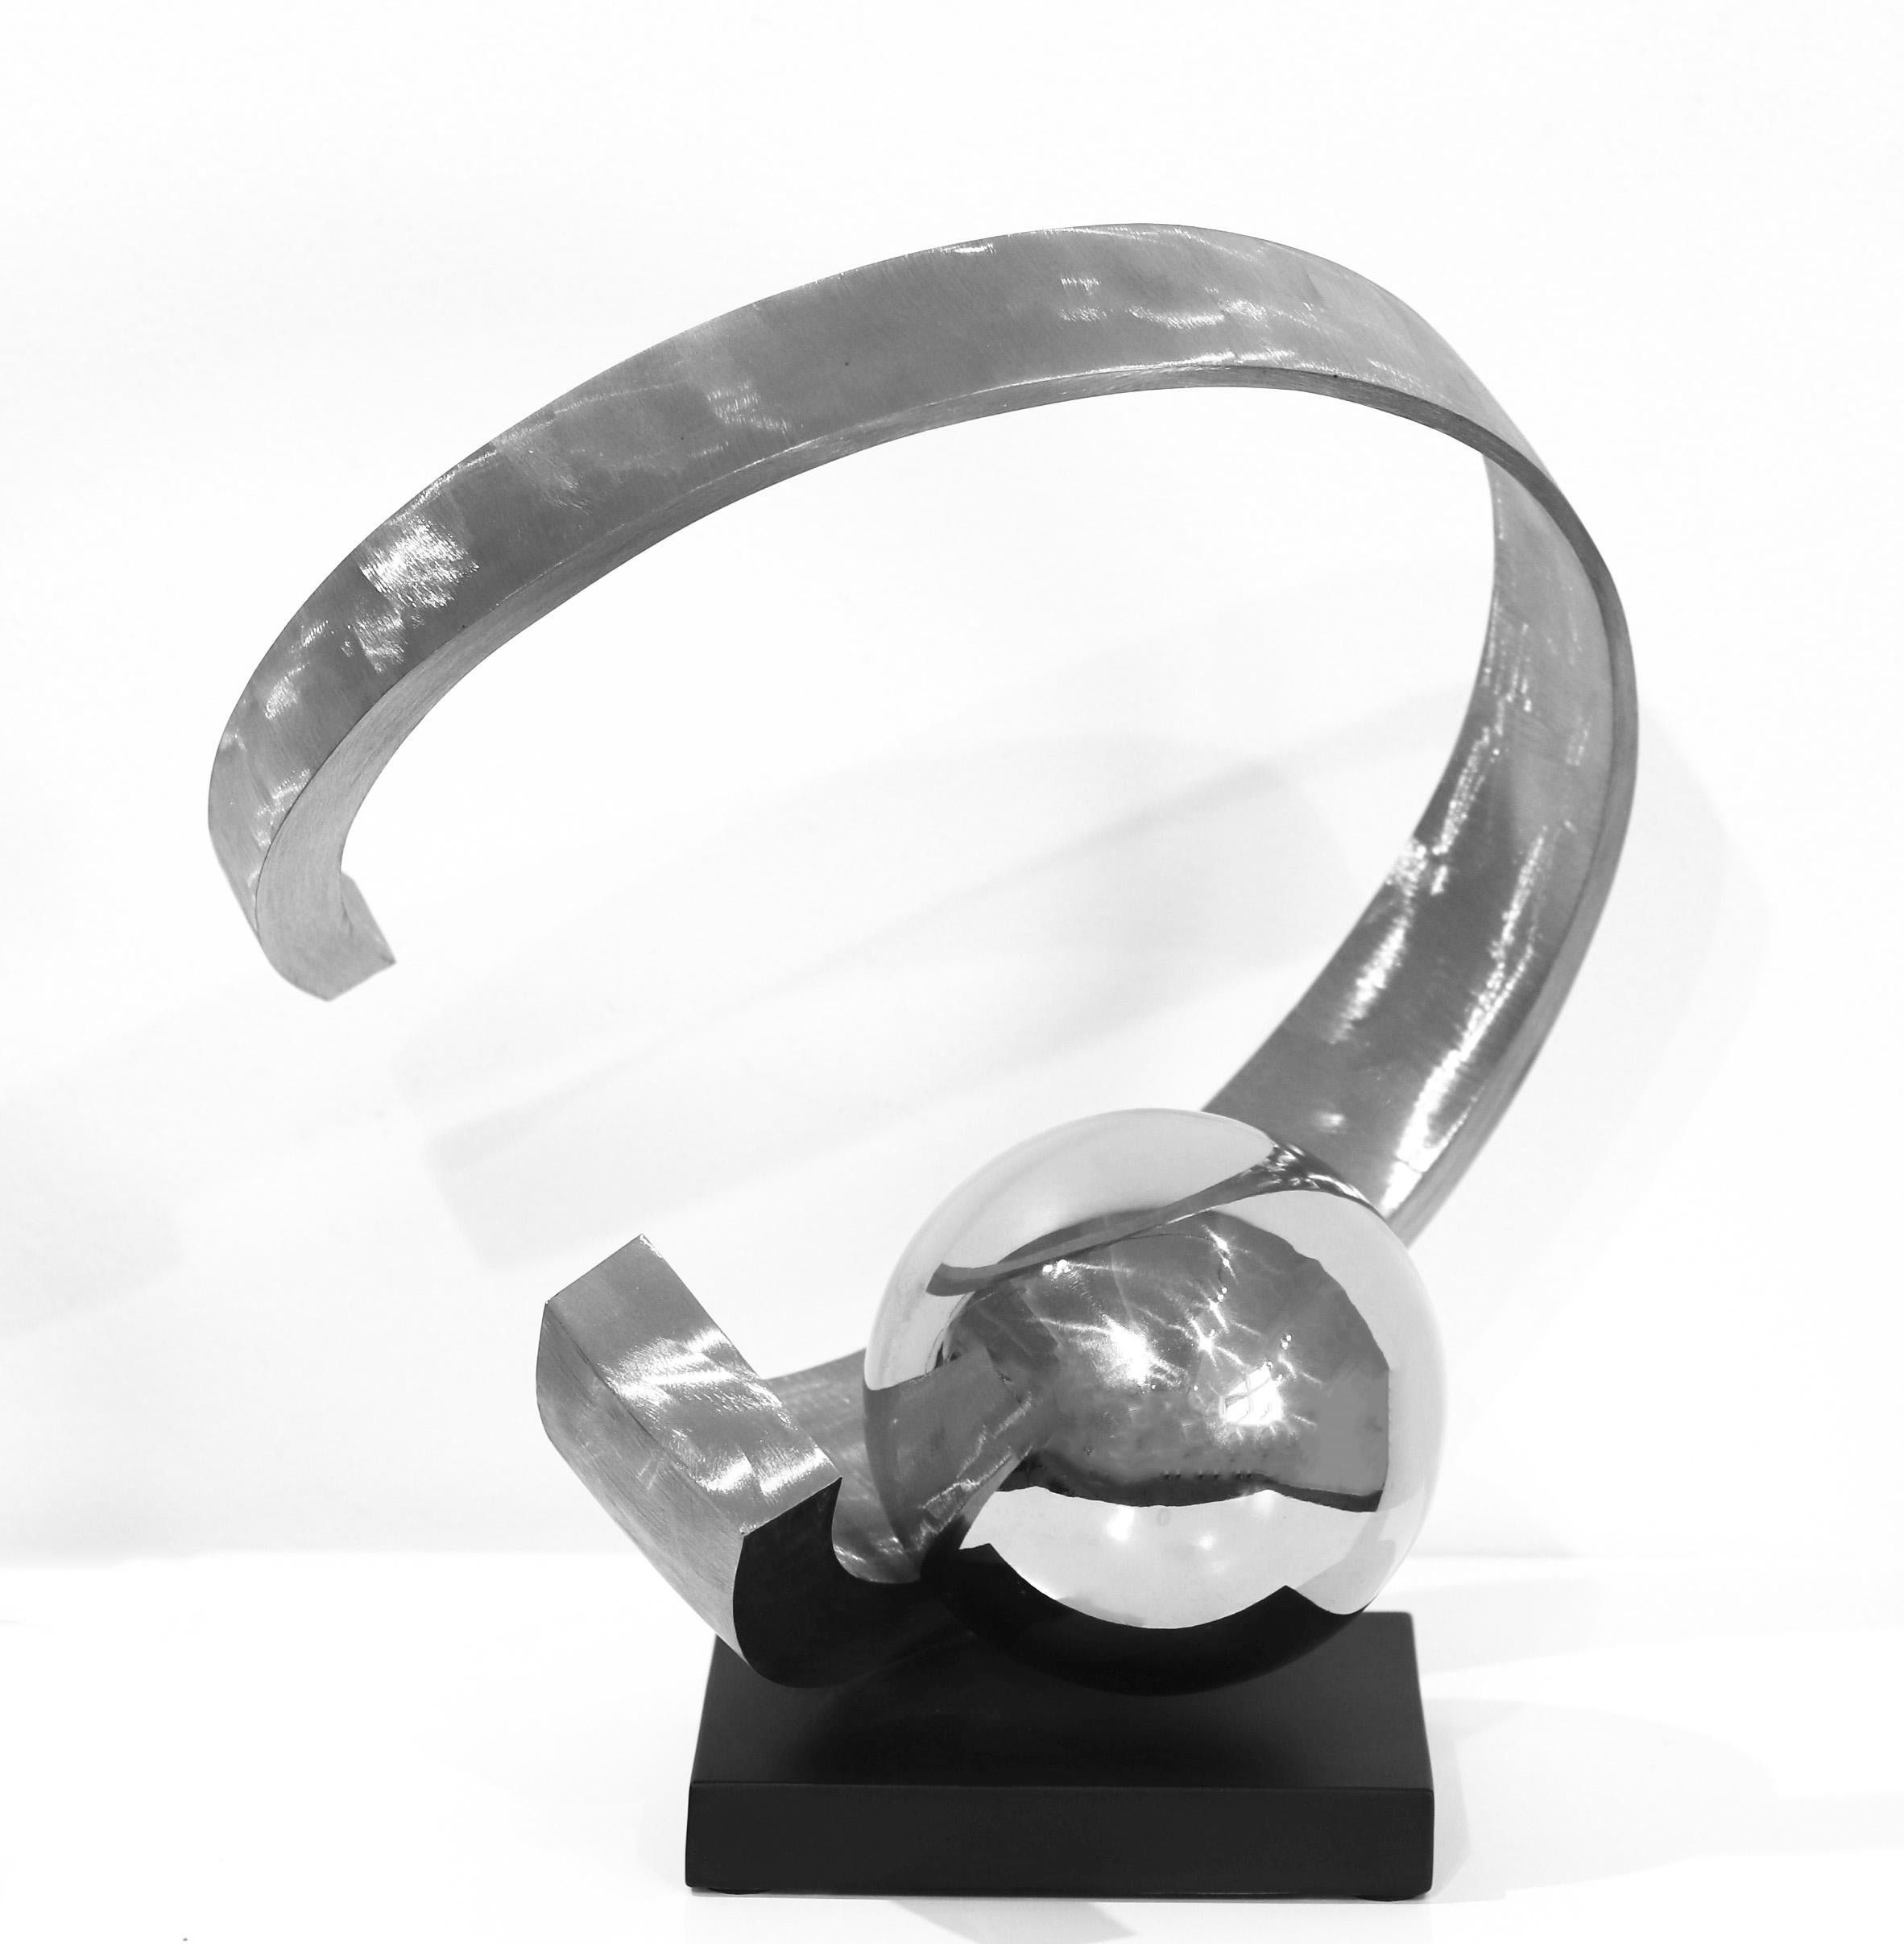 Follow Through - Original Sculpture Reflective and Matte Steel Ball and Circle - Contemporary Art by James Kelsey